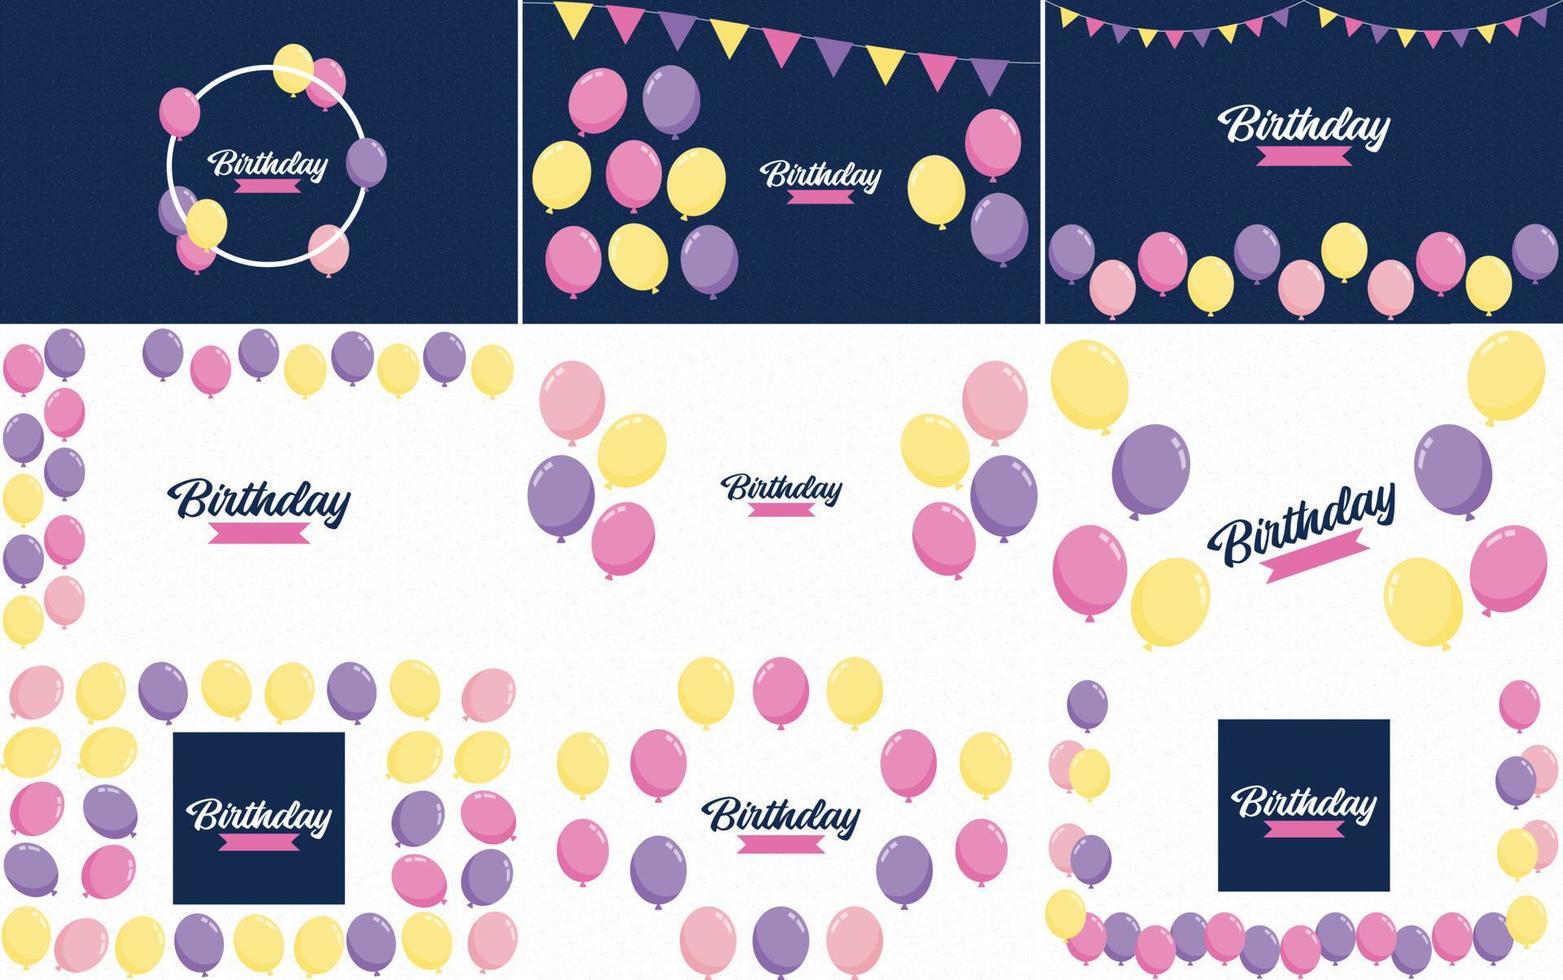 Happy Birthday in a bold. geometric font with a pattern of birthday candles in the background vector